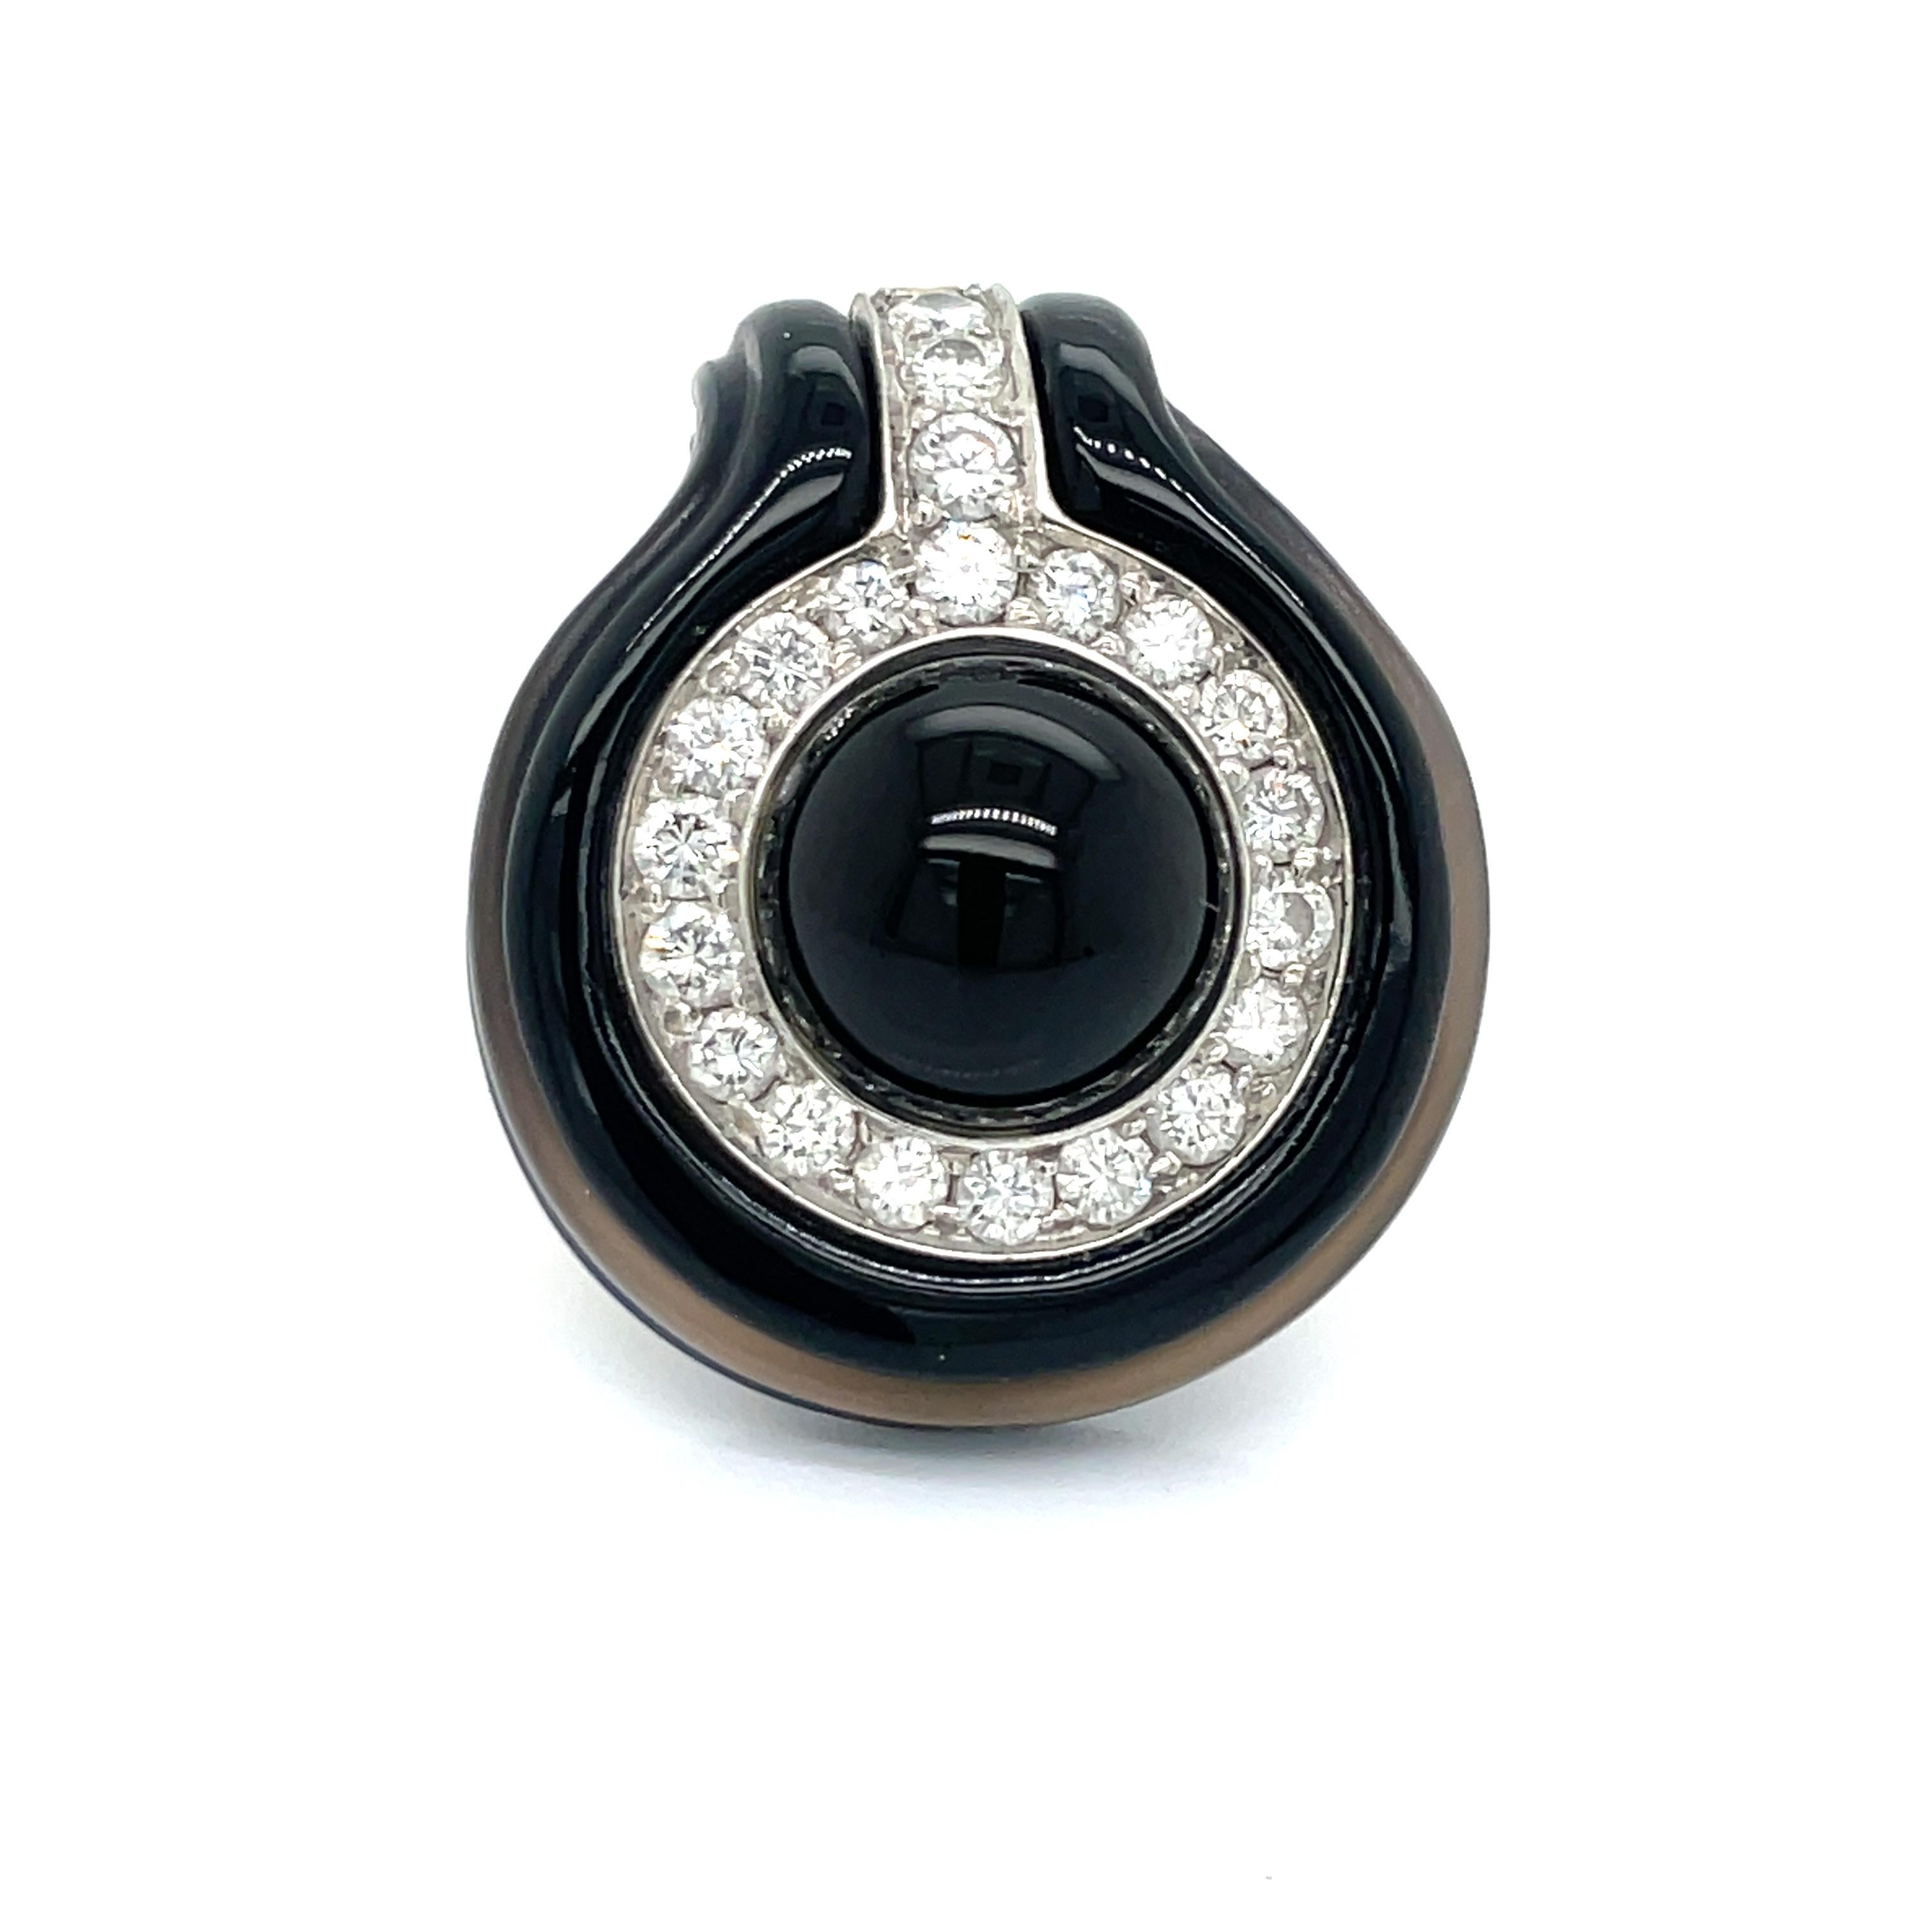 These antique onyx and diamond earrings will look amazing on you! They are composed of 33.41 grams of 18k yellow gold, and are covered in black onyx. The stunning round diamonds total 3.00 carats, with SI2-I1 clarity and H-I color. Nearly 1